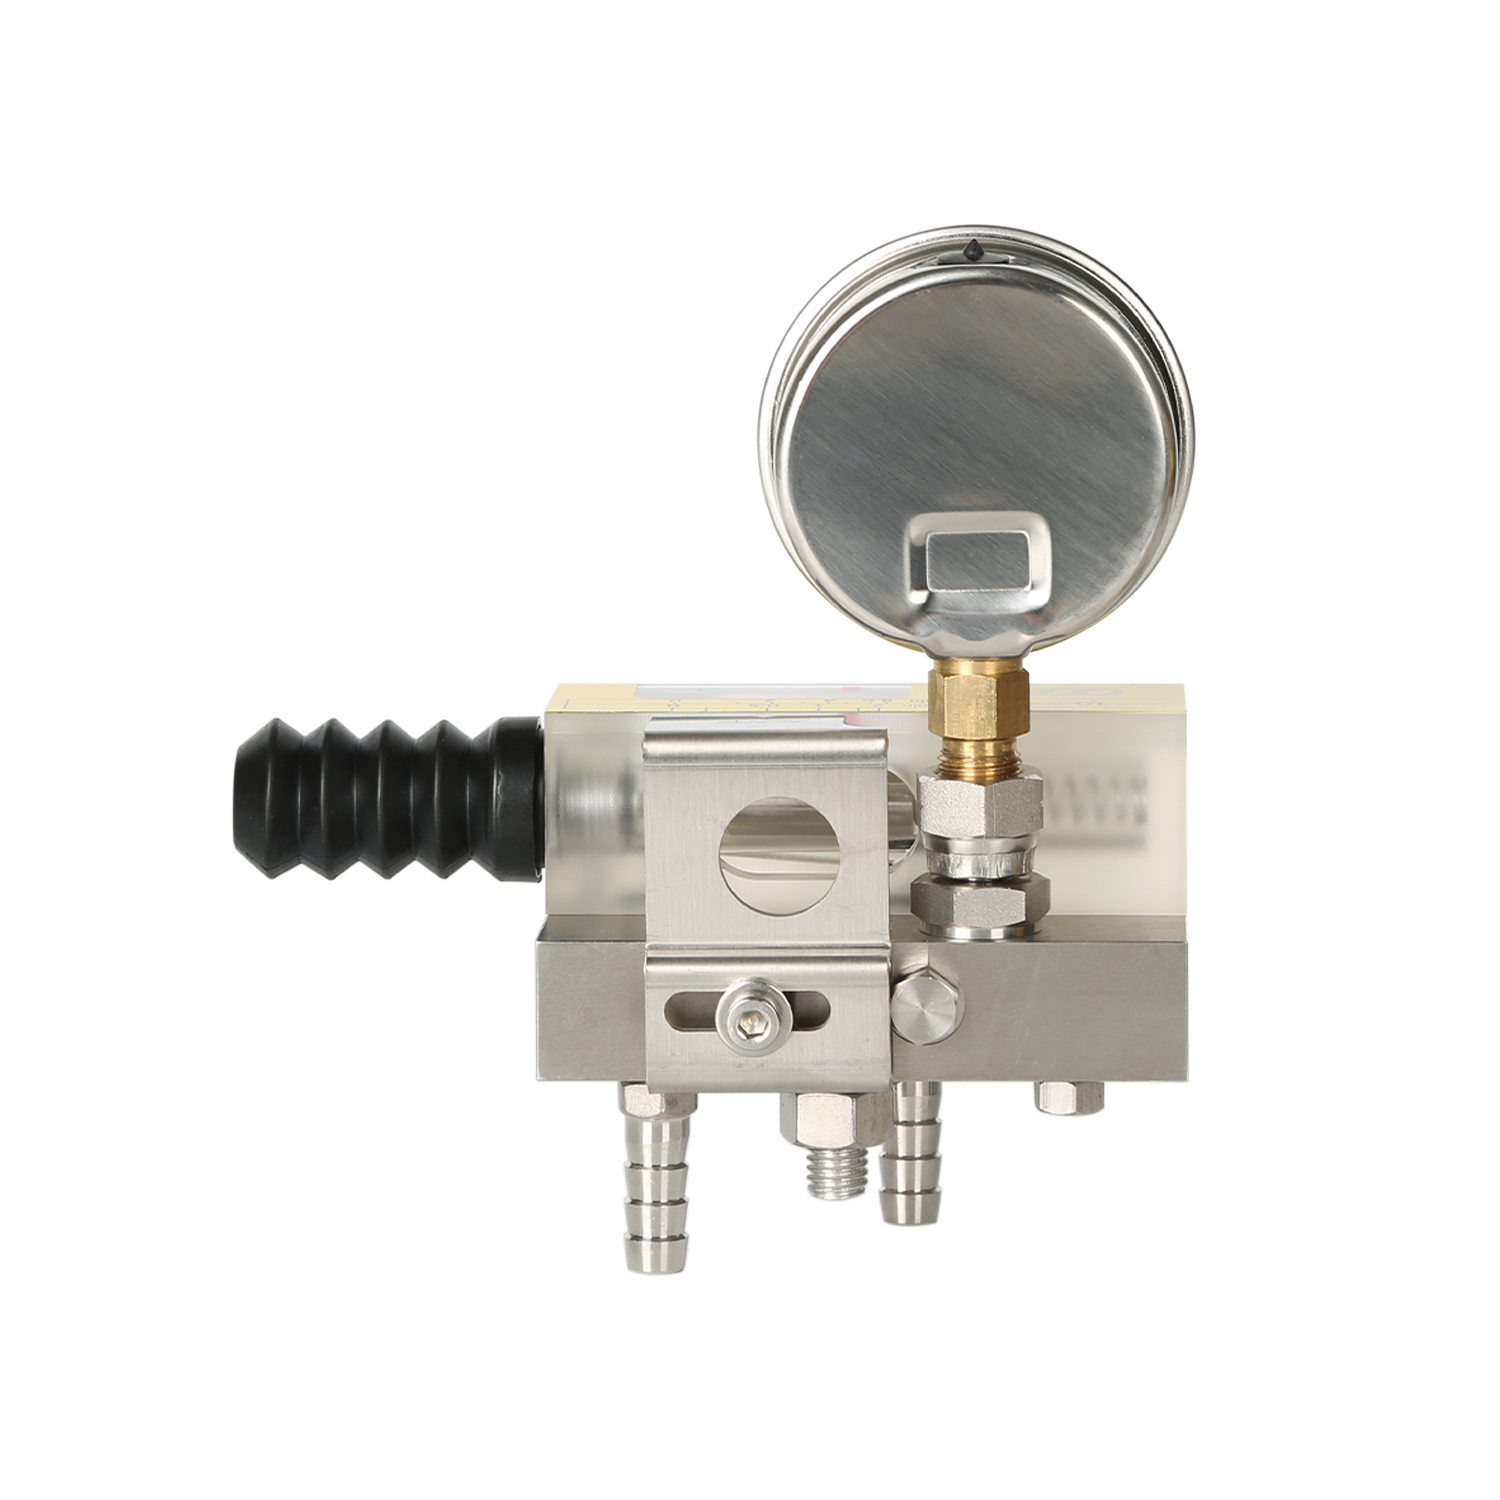 Monitoring and Control Solution Flowmeter for Seals and Seal Water Systems